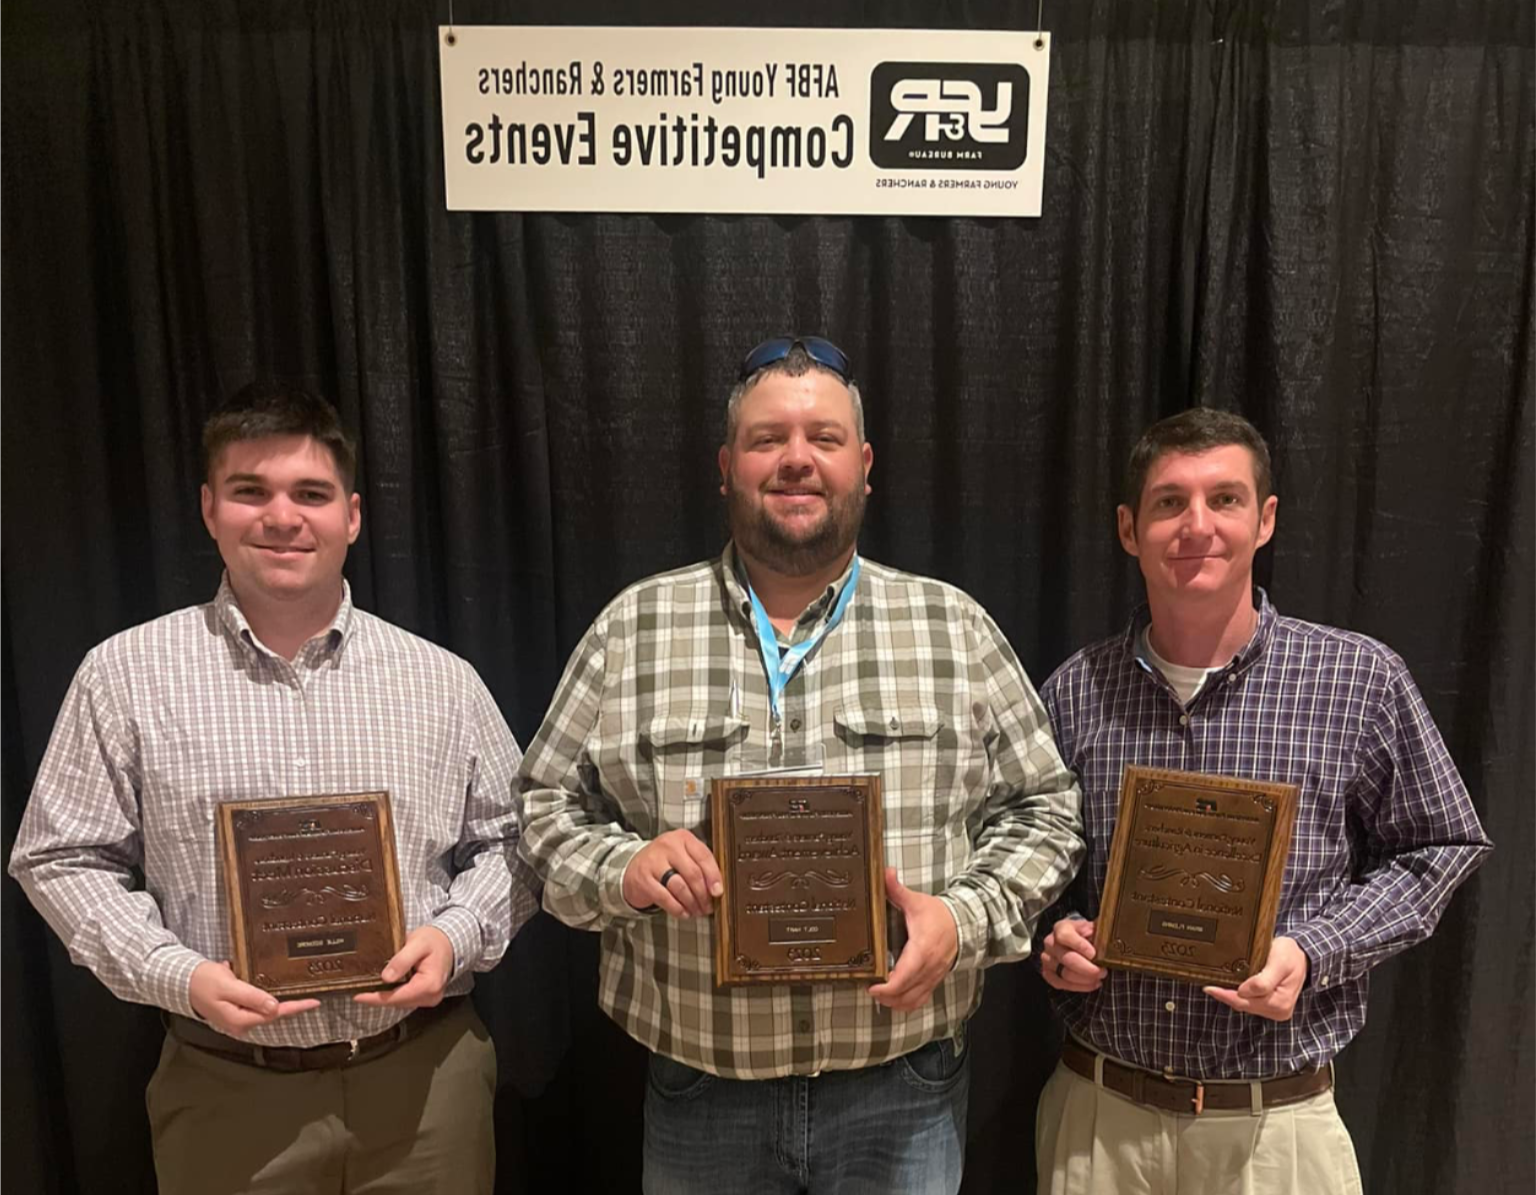 GFB is proud to have received the AFBF Award of Excellence in four different categories--advocacy, engagement & outreach, leadership & 业务发展和联盟 & partnerships.